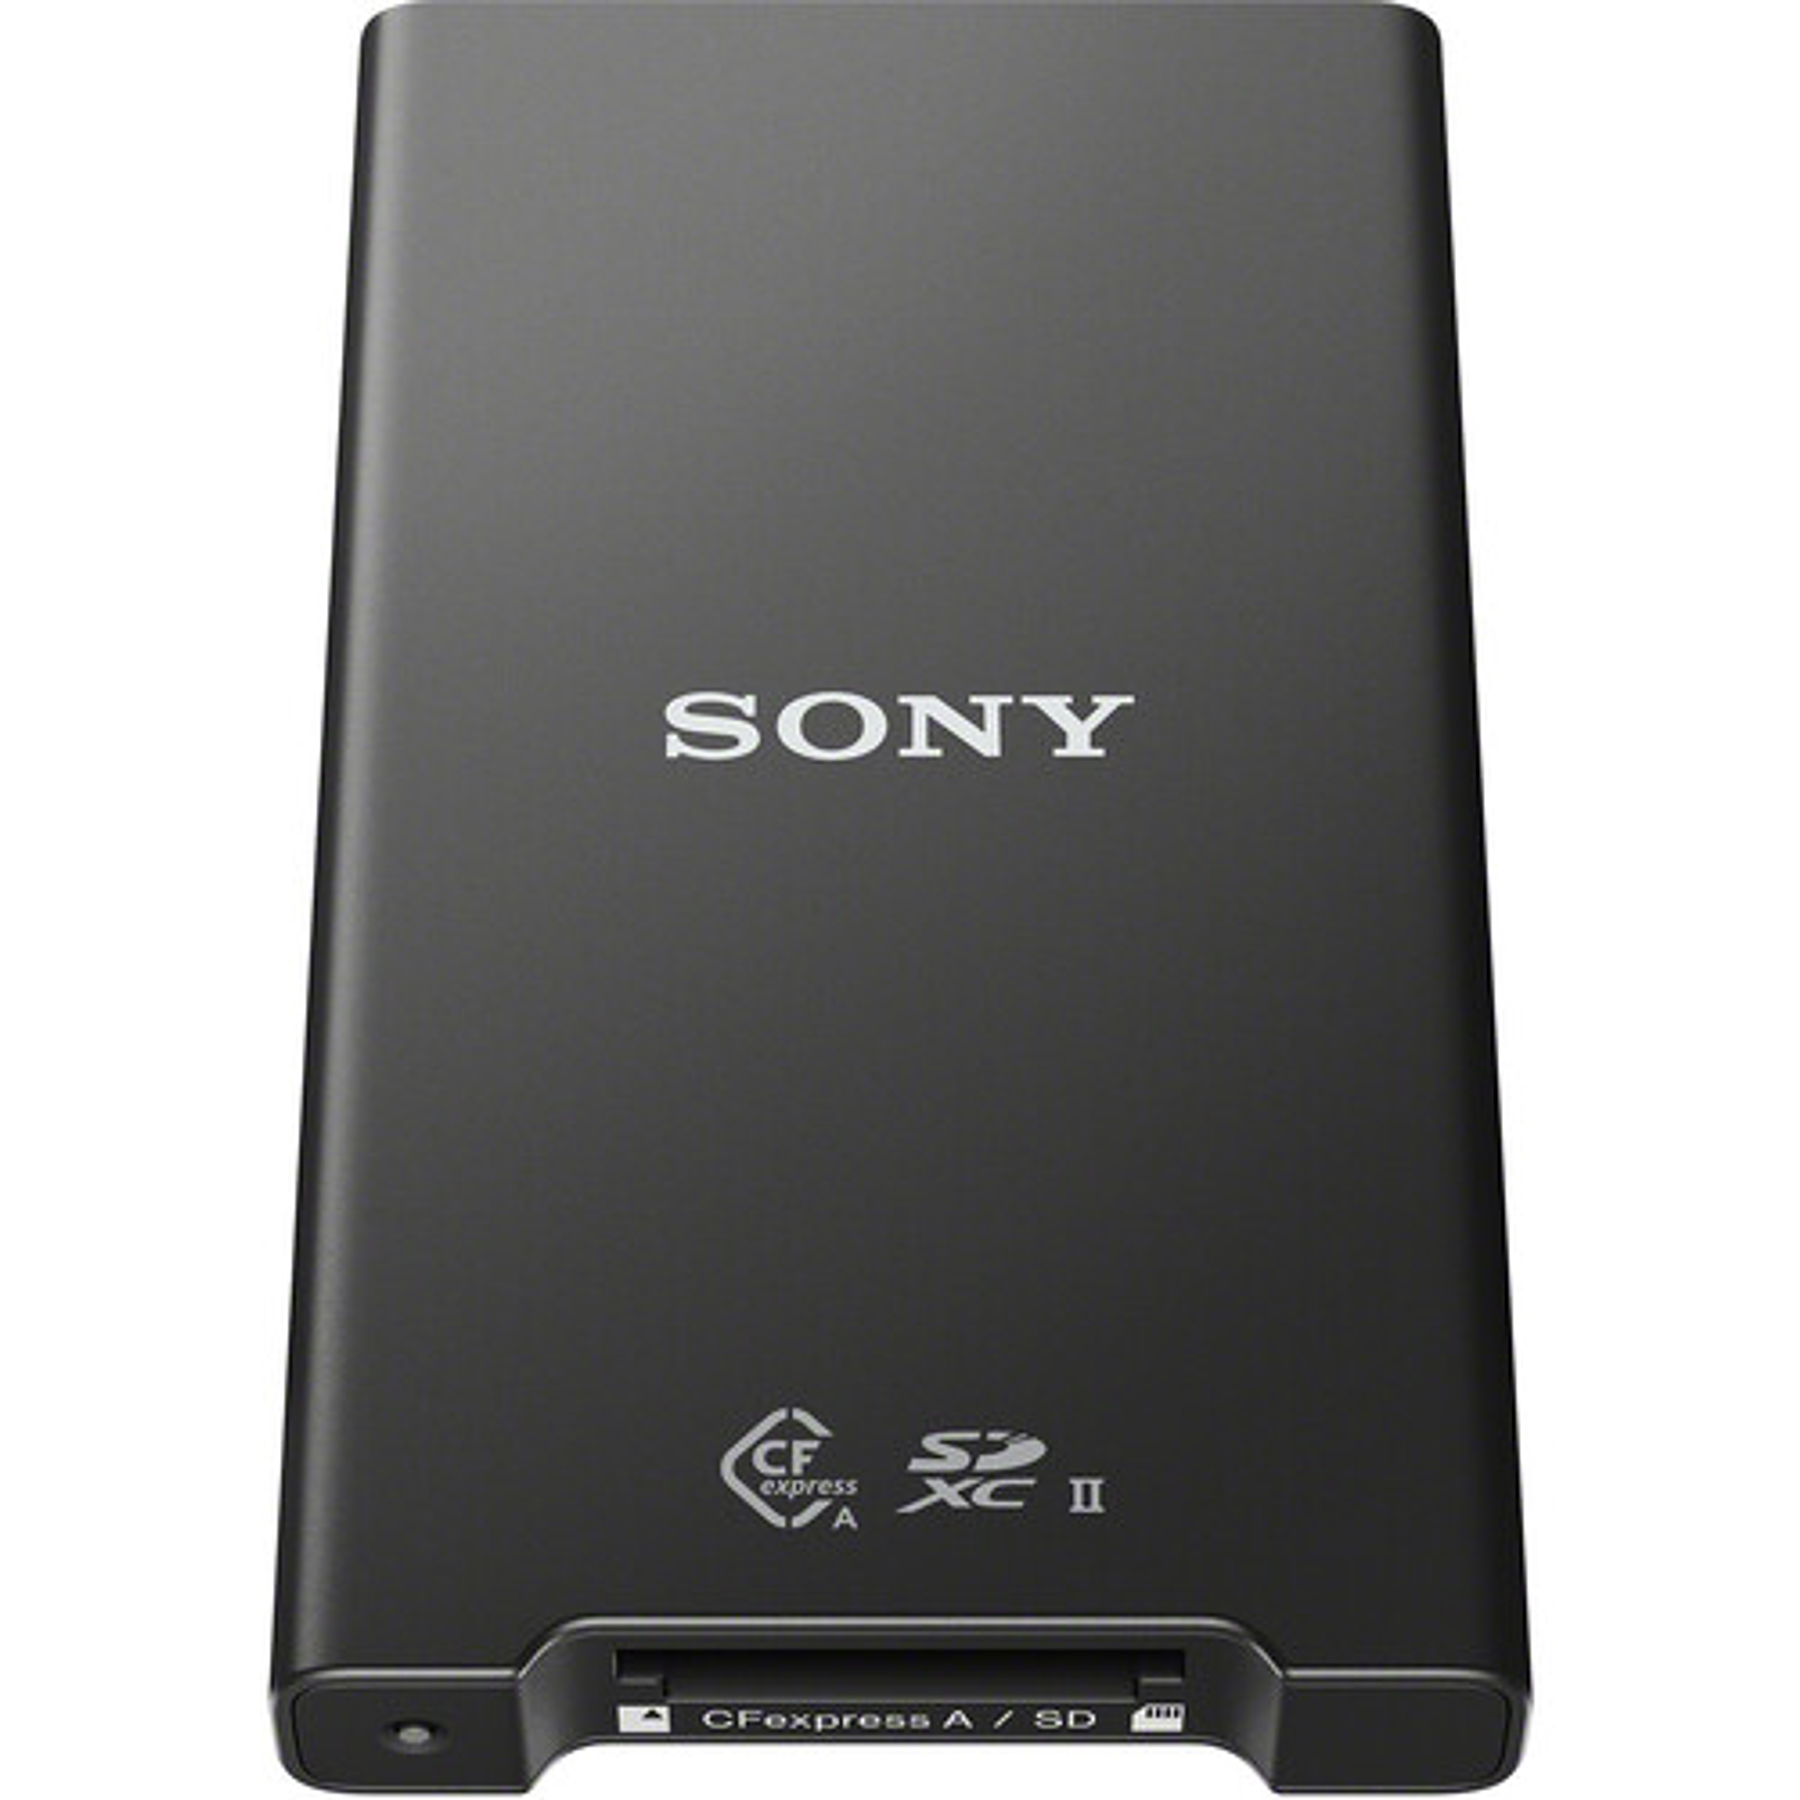 Lector Sony CFexpress Type A/SD 